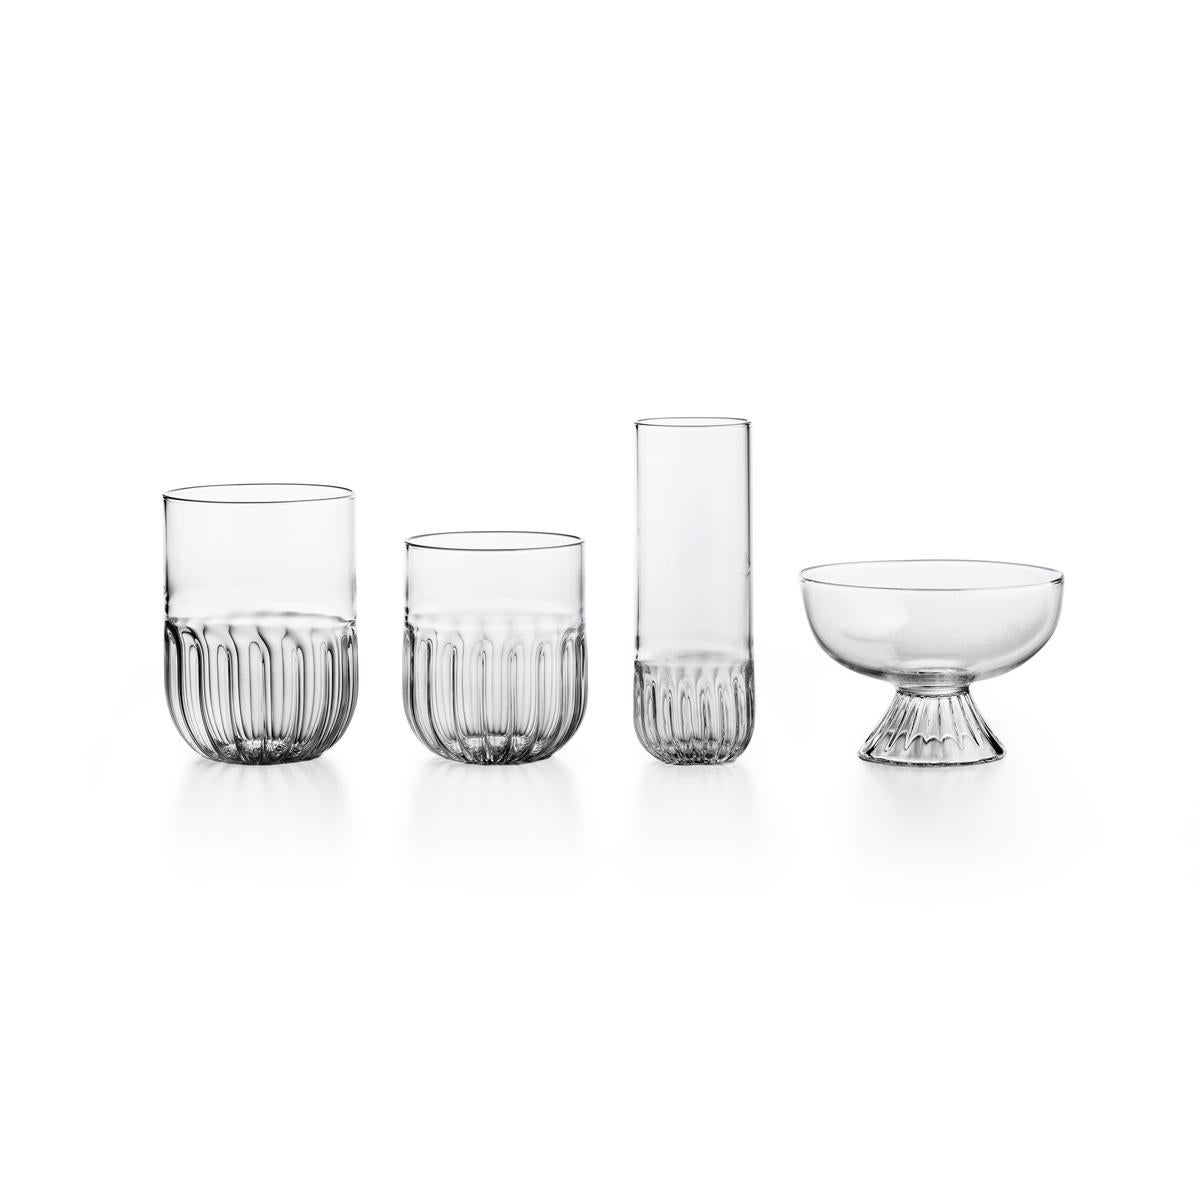 Mouth blown cup, set of 4. The routine collection is a glassware family designed by Matteo Cibic, who define it as “an essential collection for a smart daily life”. All the pieces of Routine are handcrafted and feature a soft plissé motif at the